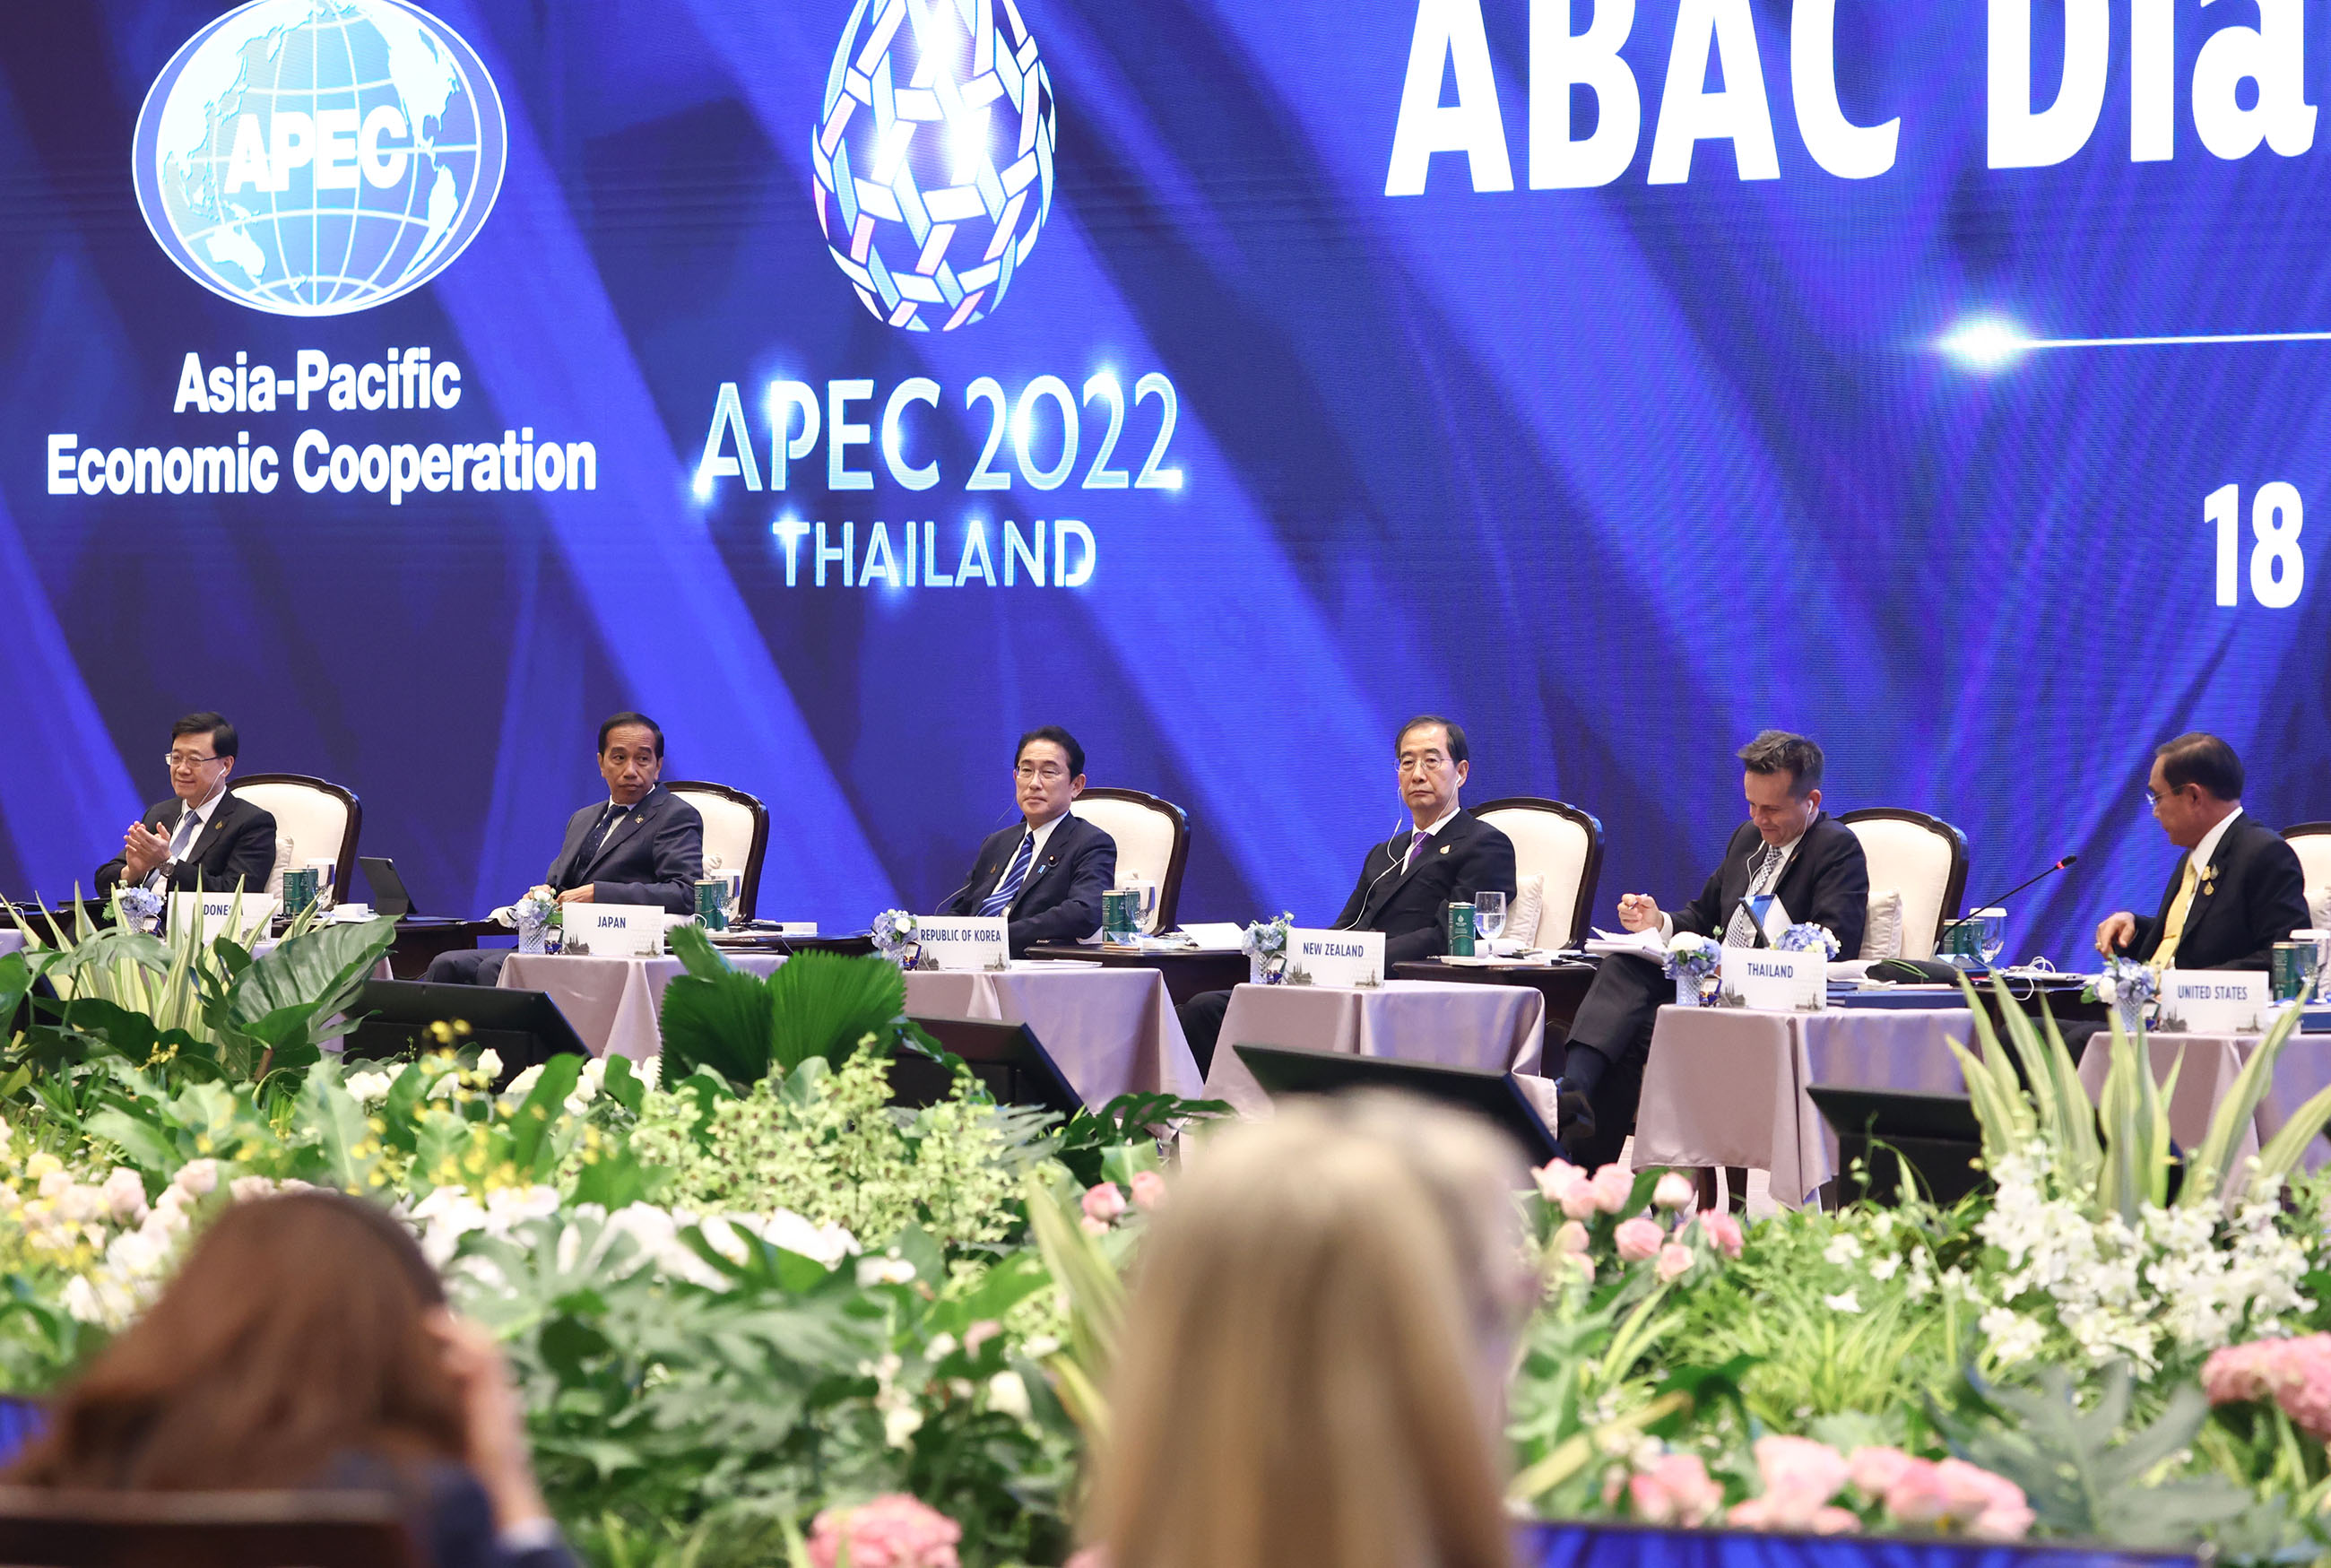 ABAC Dialogue with APEC Leaders (2)